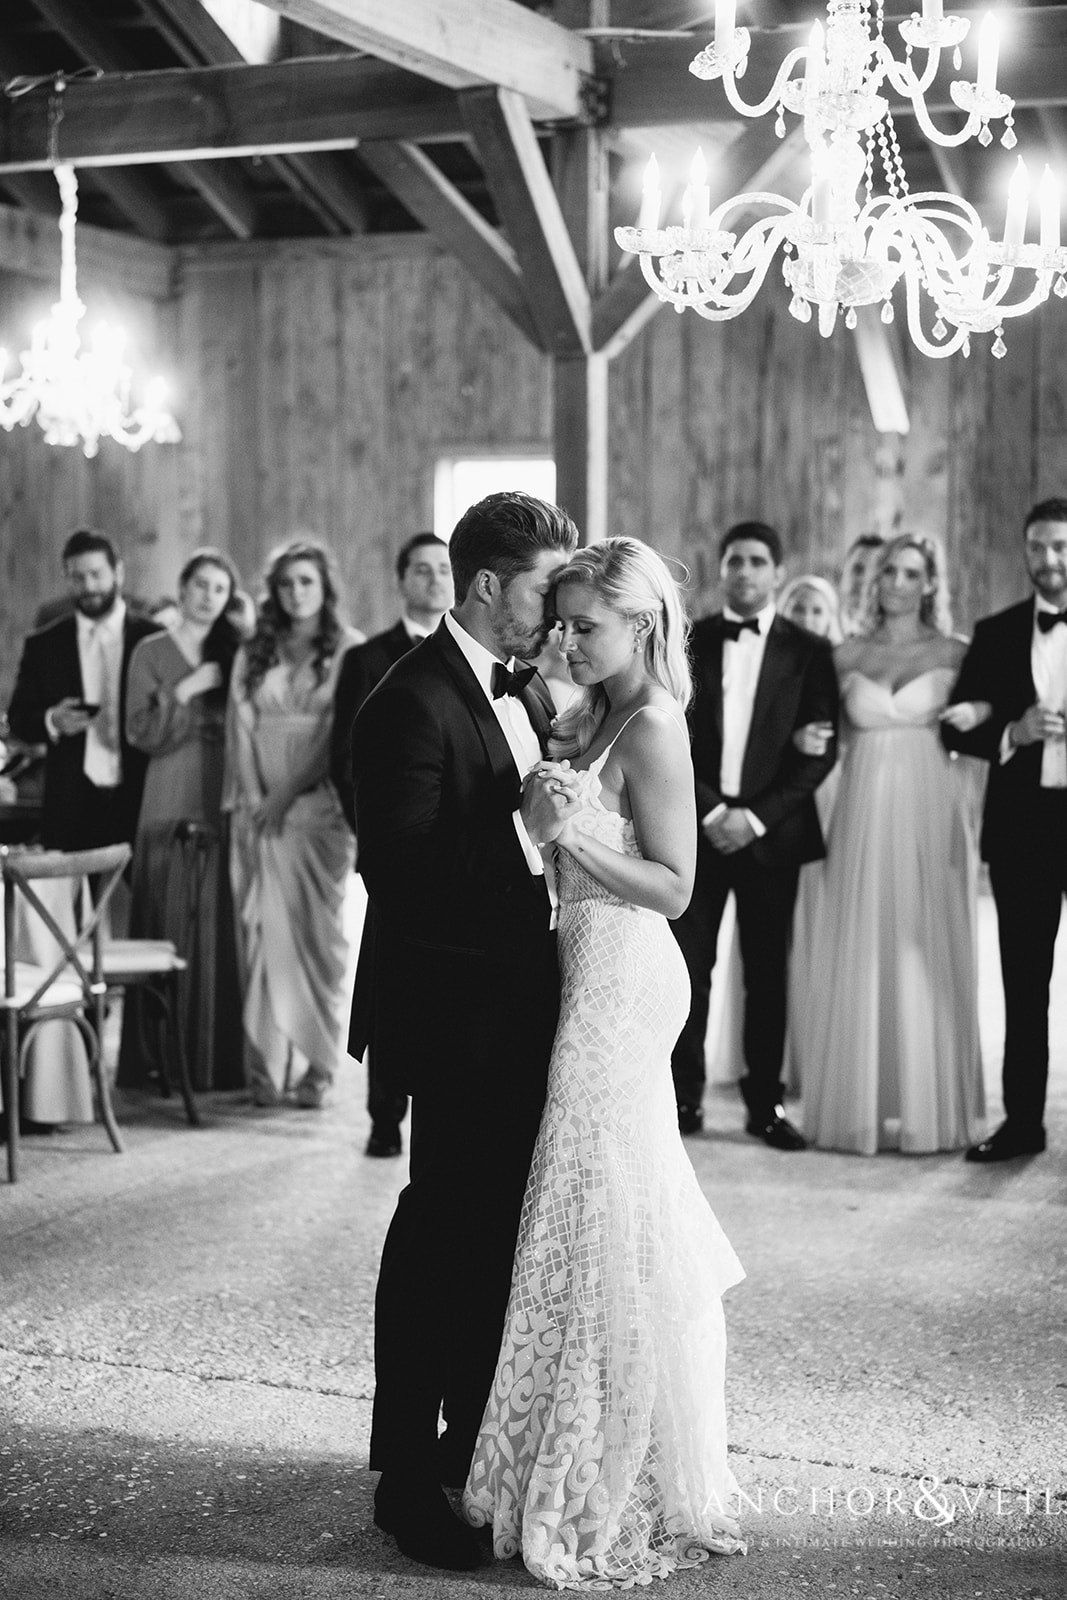 The couple's "first dance" at the Boone Hall Plantation Wedding 